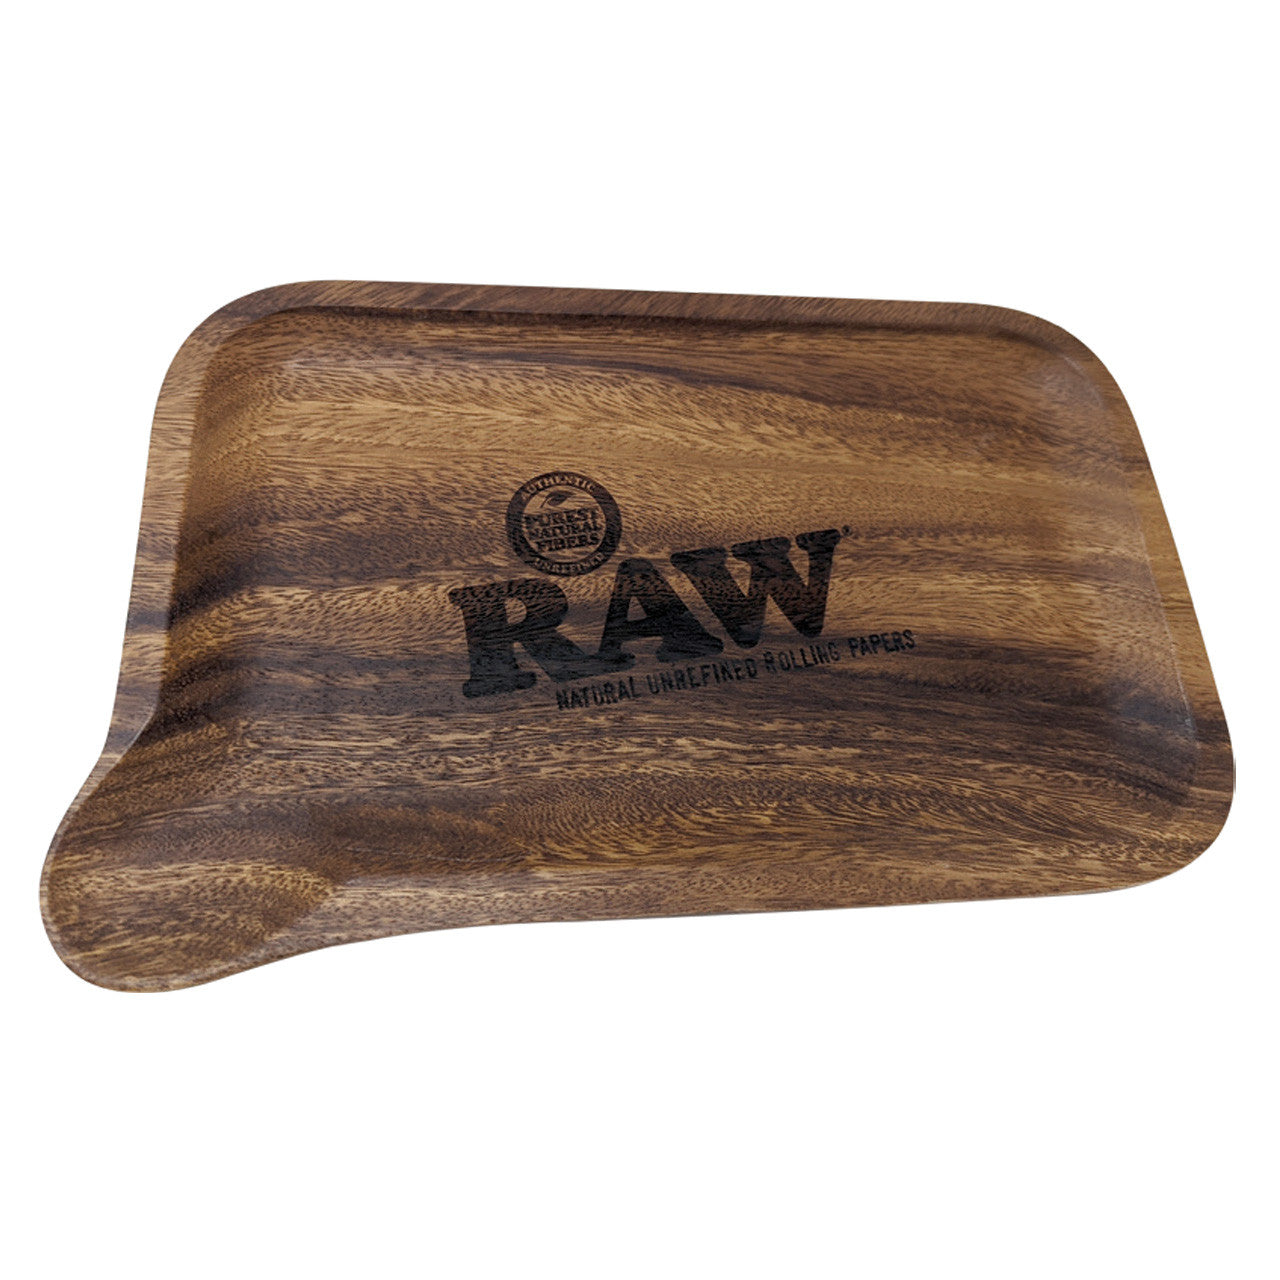 RAW Wooden Rolling Tray with Pour Spout